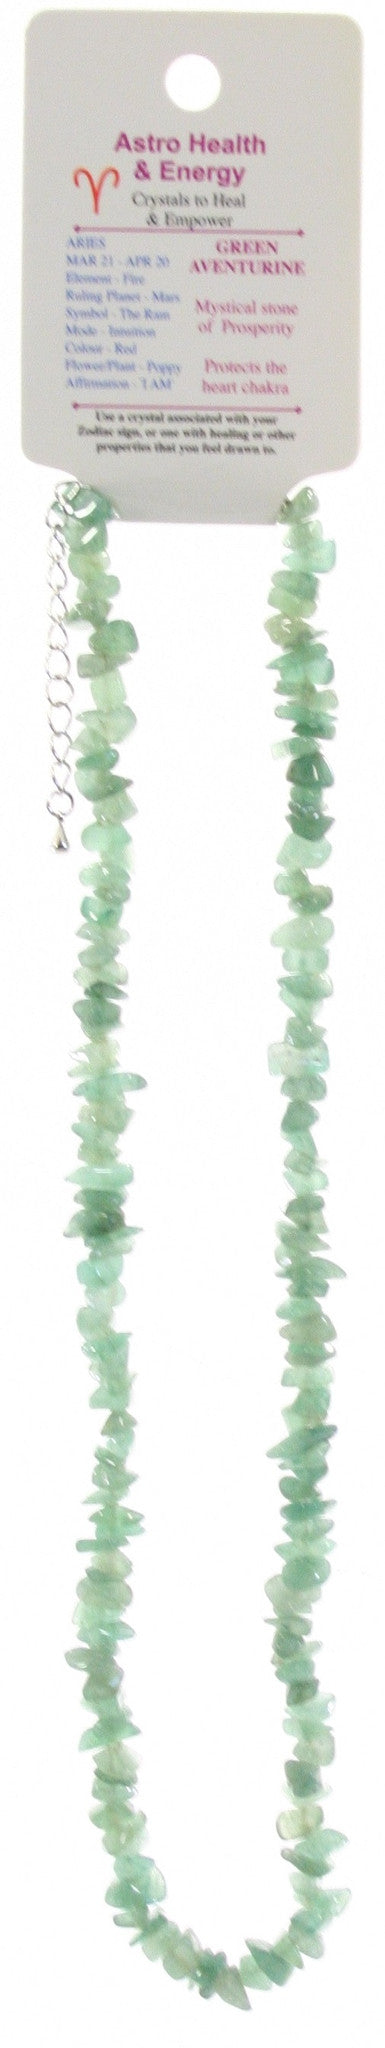 Green Aventurine Crystal Chip Horoscope Necklace - Star Sign Aries